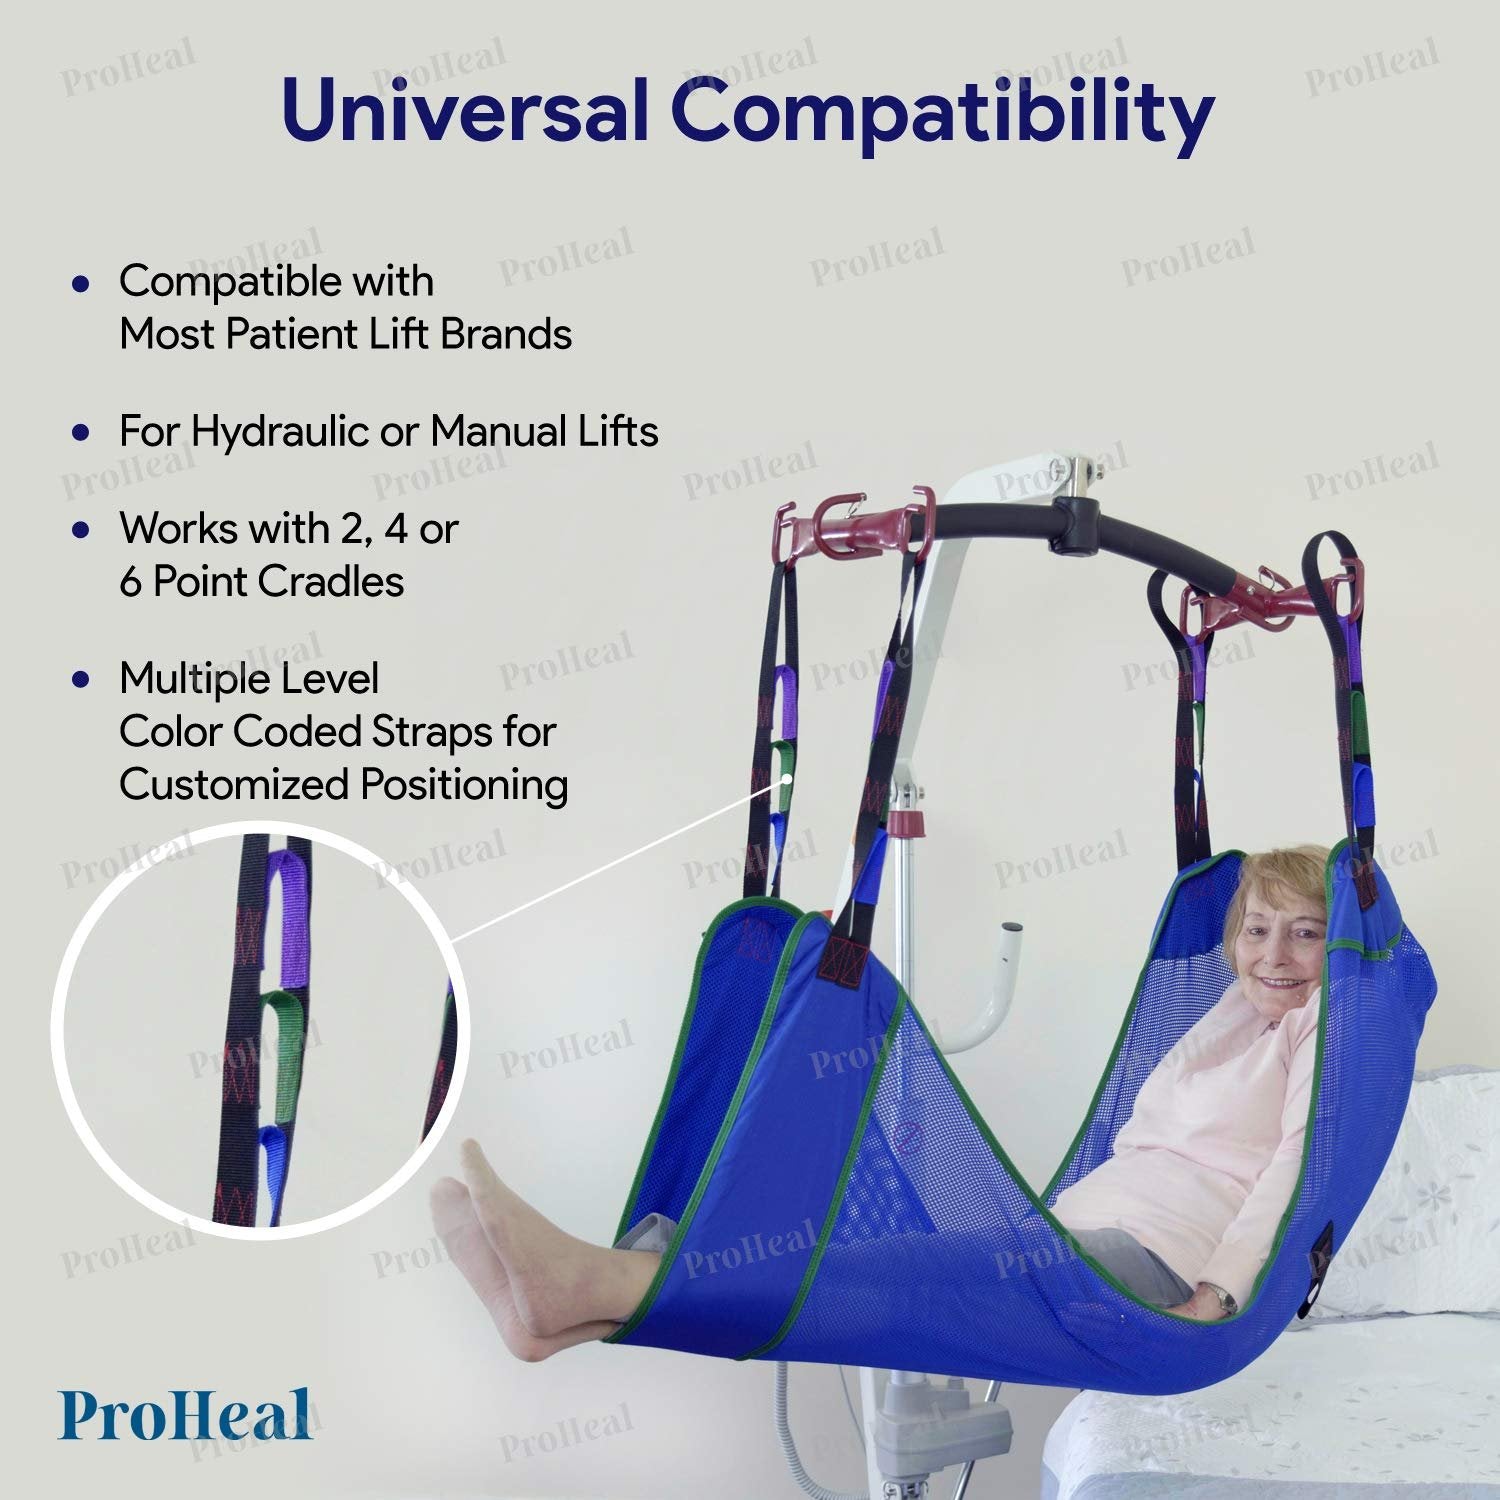 ProHeal Universal Full Body Lift Sling, Medium, 50"L x 40" - Solid Fabric Polyester Slings for Patient Lifts - Compatible with Hoyer, Invacare, McKesson, Drive, Lumex, Medline, Joerns and More